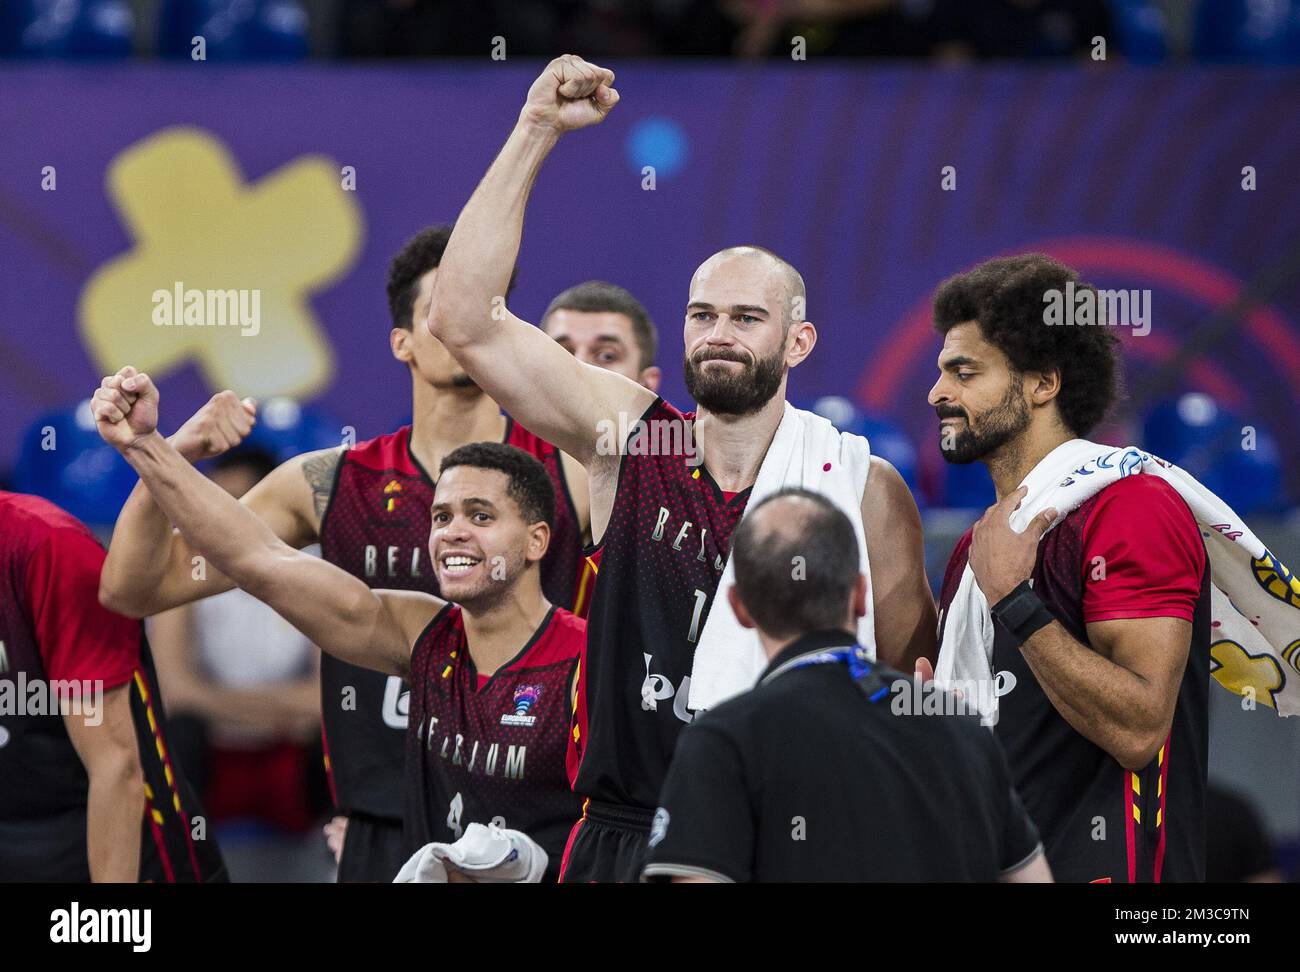 Pierre-Antoine Gillet of Belgium, Emmanuel Lecomte of Belgium, Jean-Marc  Mwema of Belgium pictured during a basketball match between Bulgaria and  the Belgian Lions, Wednesday 07 September 2022, in Tbilisi, Georgia, game  5/5